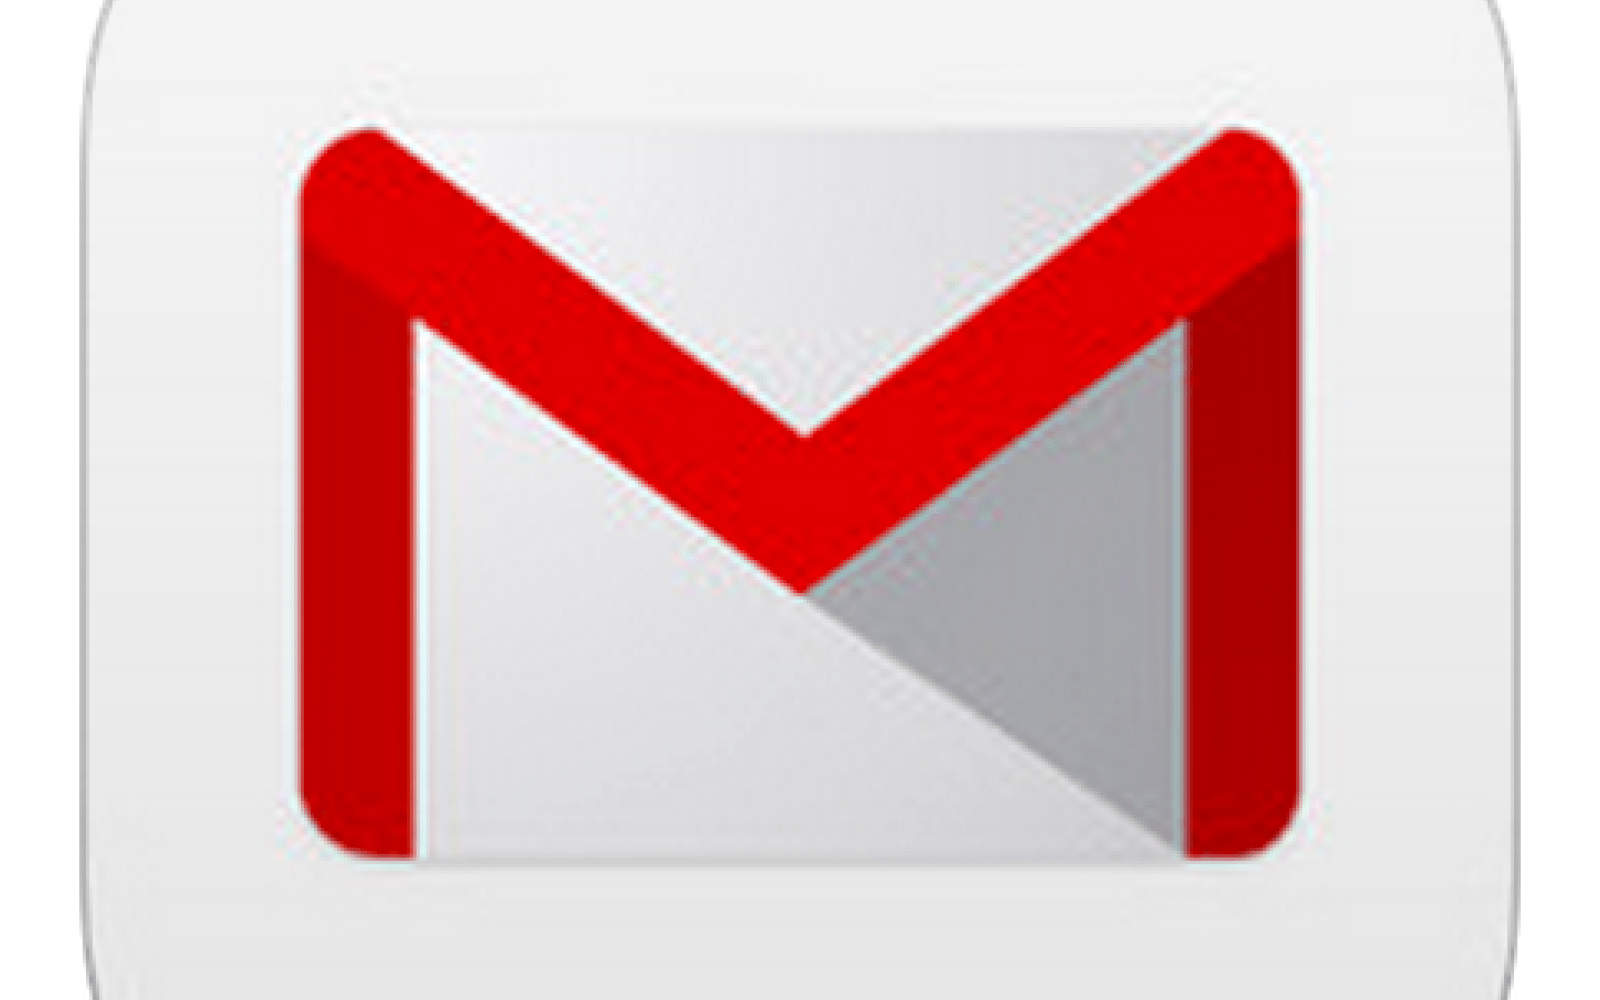 Gmail App Logo - Gmail iOS app gets new icon, full-screen mode for large images ...